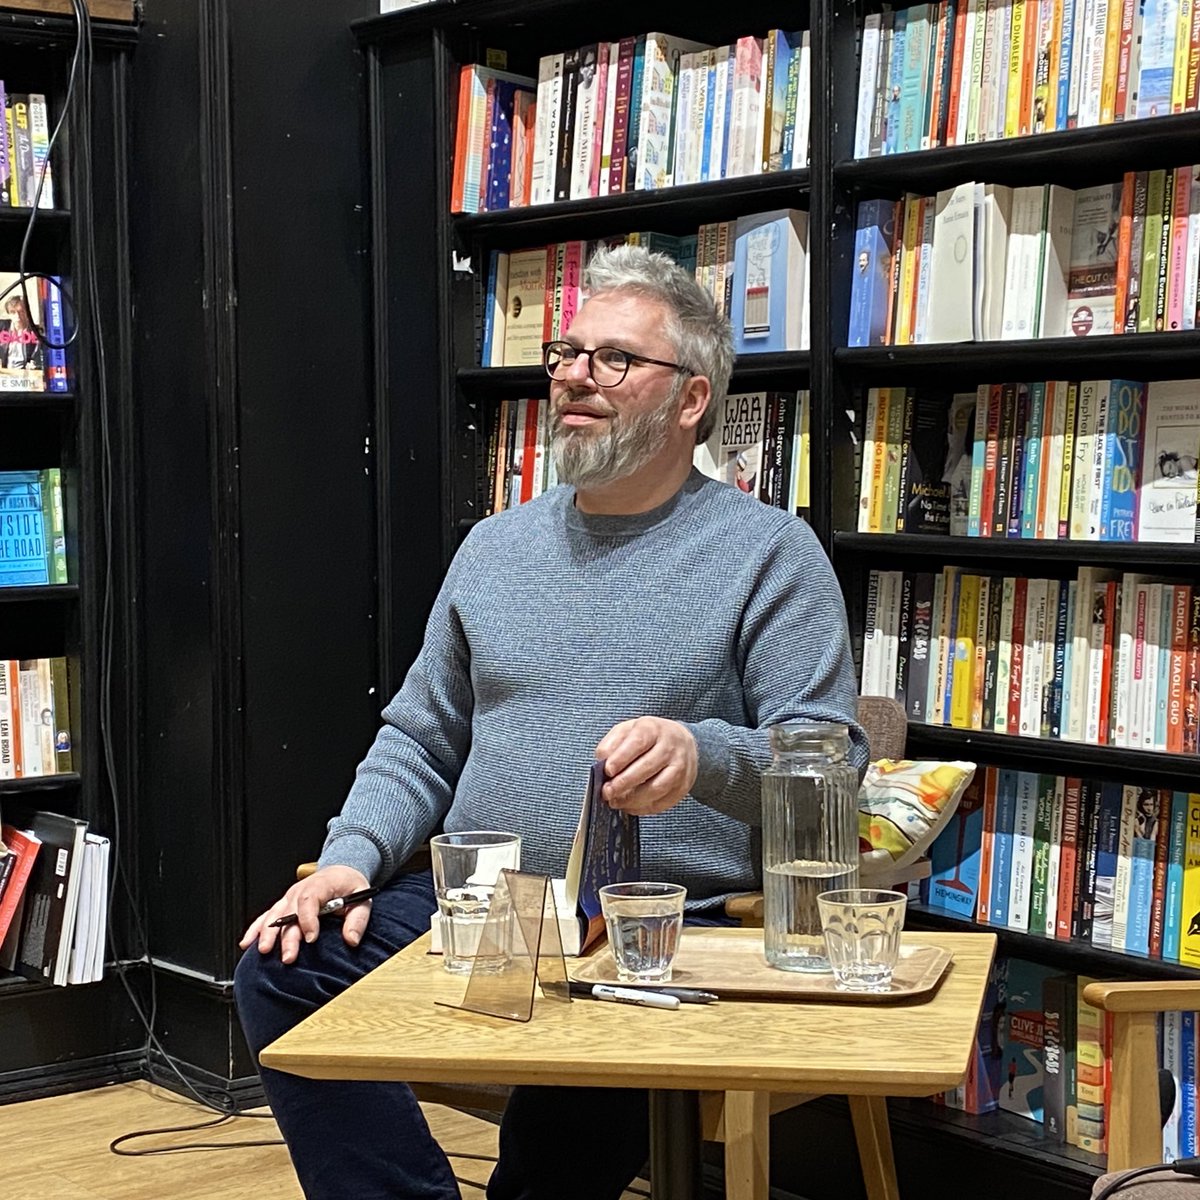 Enjoying @RussInCheshire and his #theweekintory might be our only reason for not wanting a GE too soon… thanks for coming along! @unbounders @beardedjourno